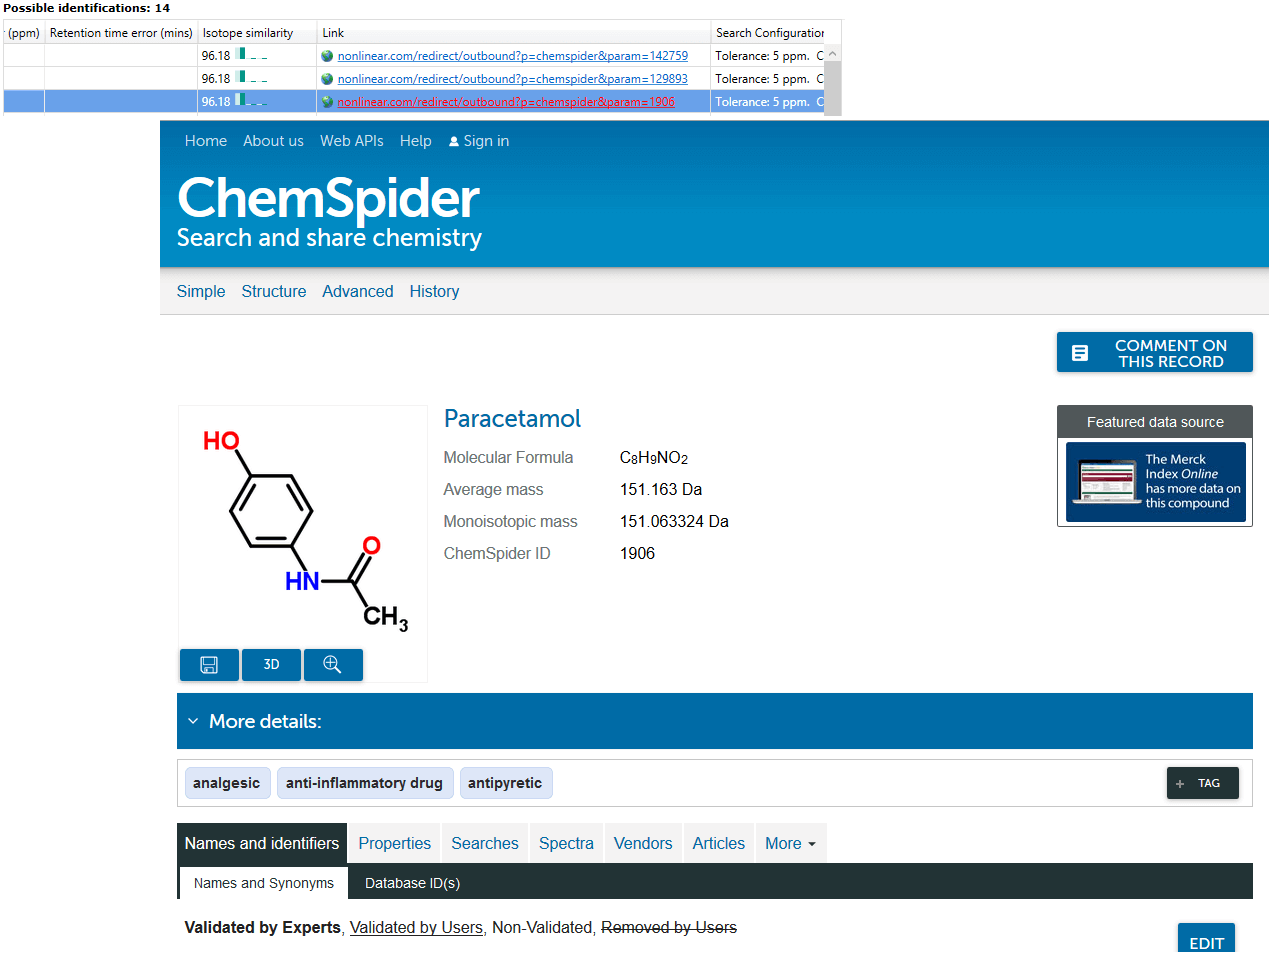 Clicking on the entry in the Link field will redirect you to the ChemSpider entry for a hit